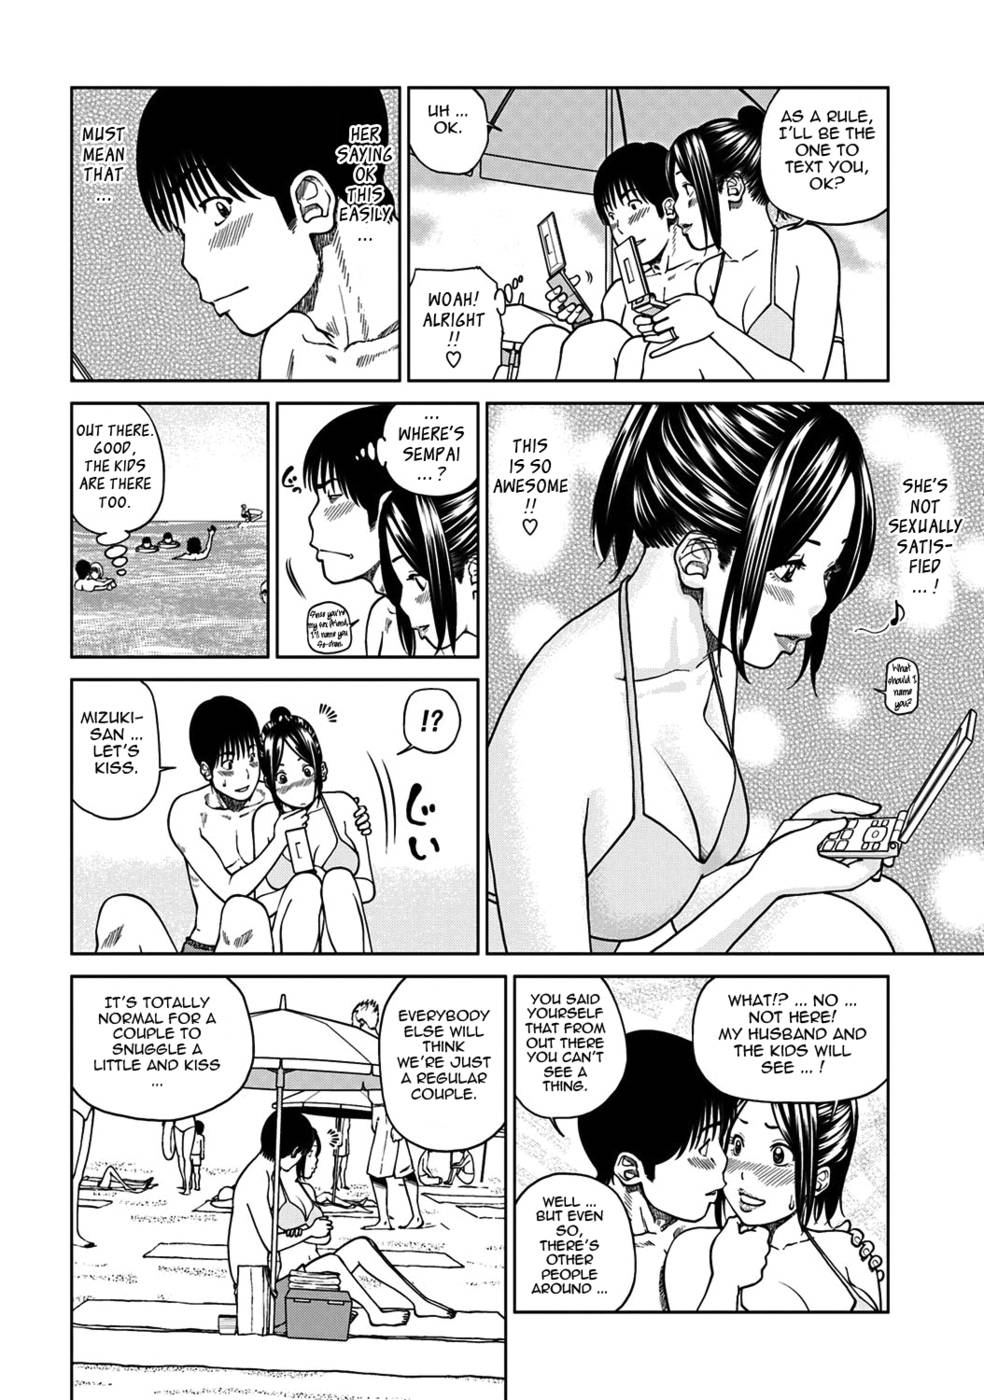 33 Year Old Unsatisfied Wife-Chapter 7-The Married Woman Who Became A Sex Friend-Hentai Manga Hentai Comic